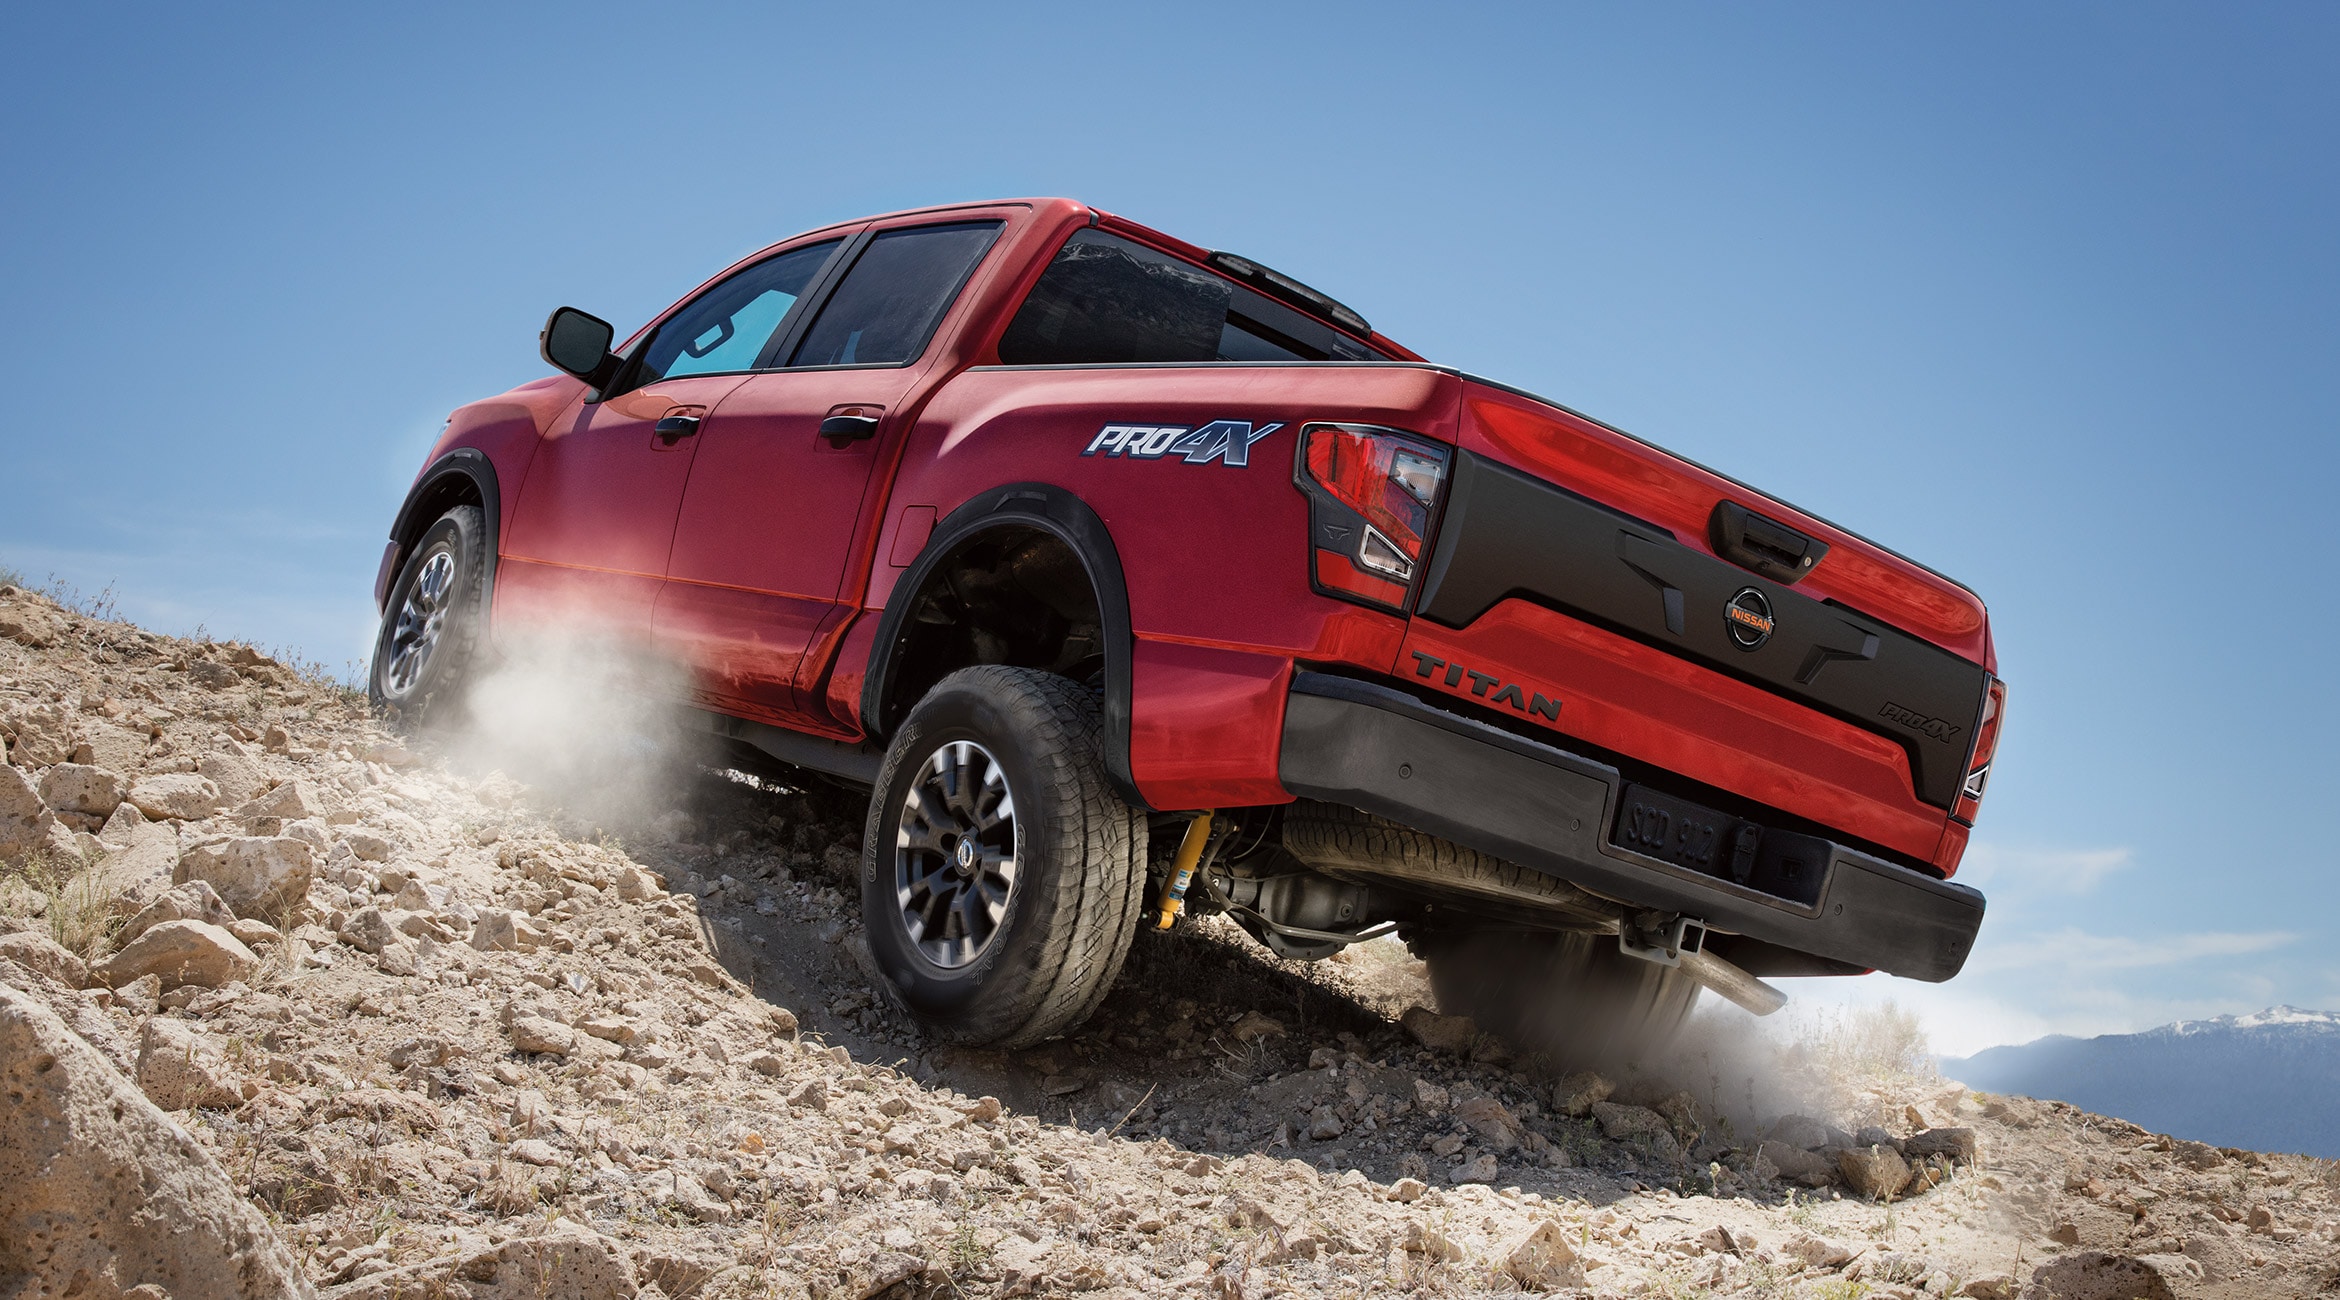 A red Nissan Titan Truck going uphill showcasing its off-road capabilities